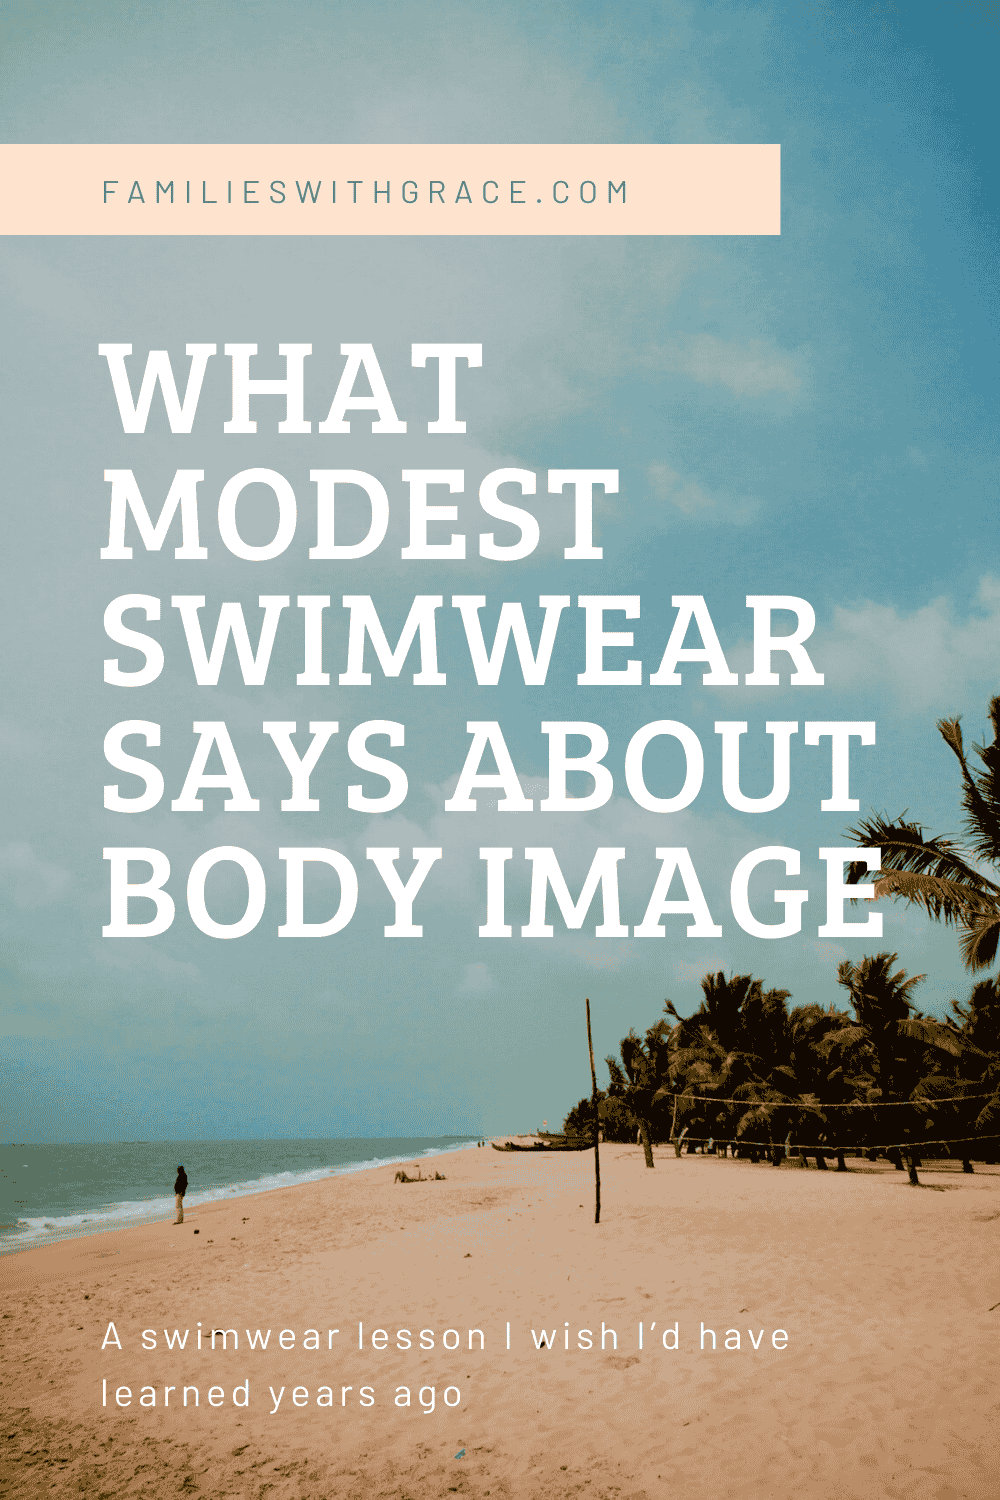 What modest swimwear says about my body image